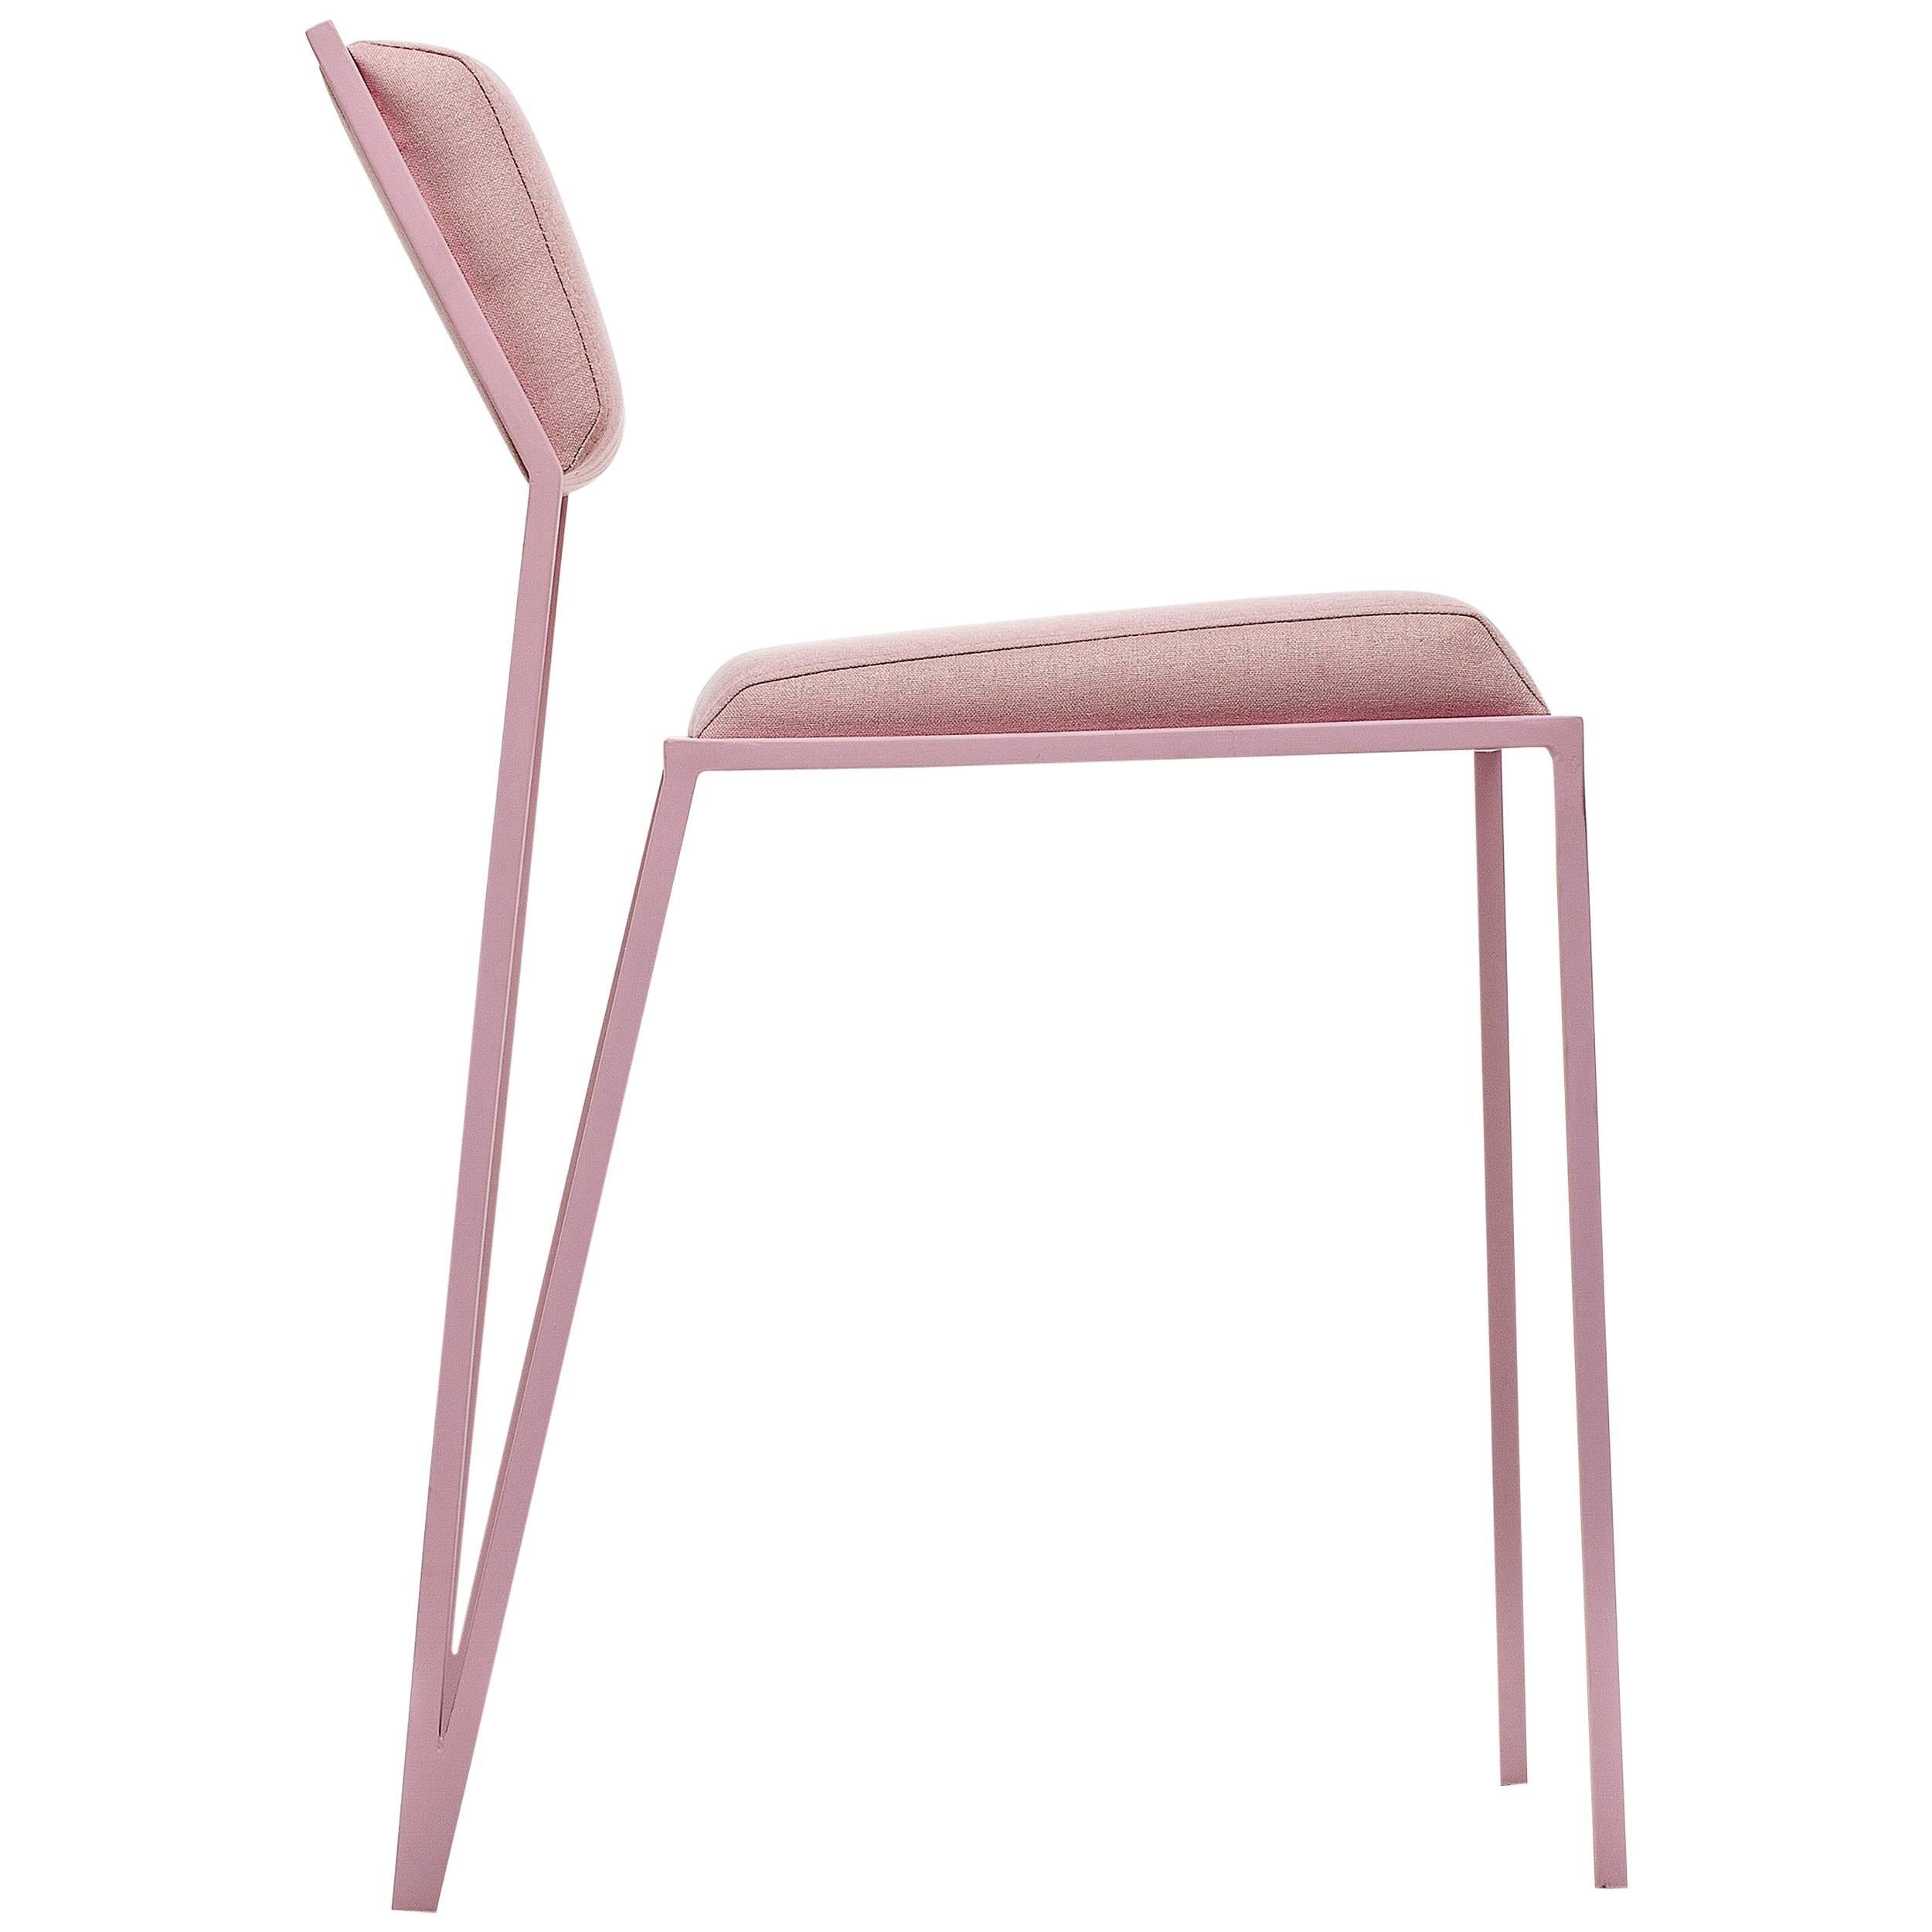 The Minimalist 'Velvet' chair was designed from clean and pure lines with the elimination of any kind of excesses so that your greater identity were the colors, in a range of 66 options chosen by the user. By its Minimalist appearance, the color of